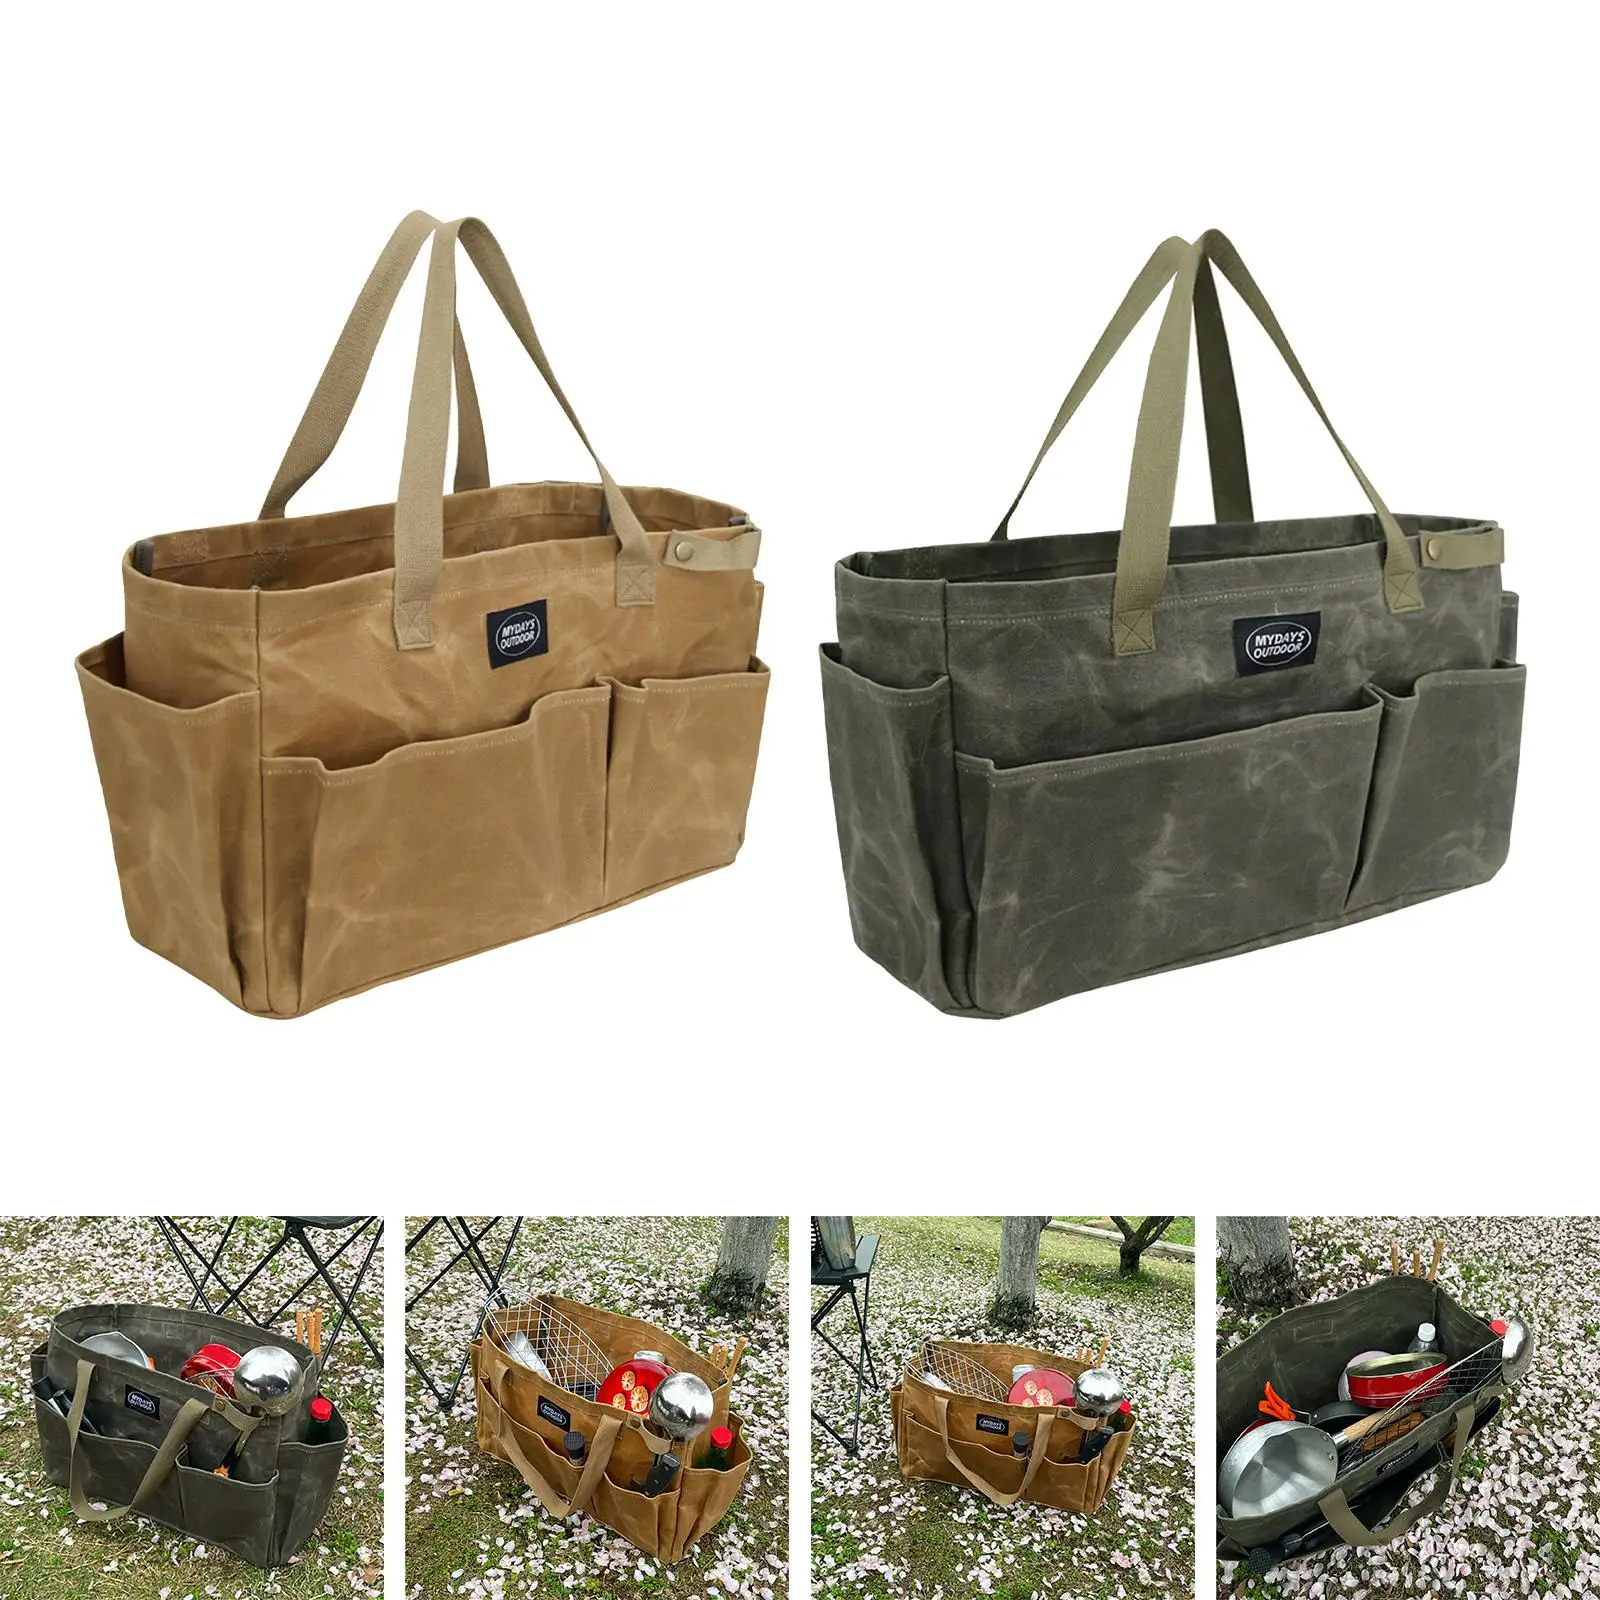 Camping Gear Storage Bag Basket with Outside Pockets Stuff Carrier Utility Tote Bag for Beach Barbecue Picnics Fishing Groceries